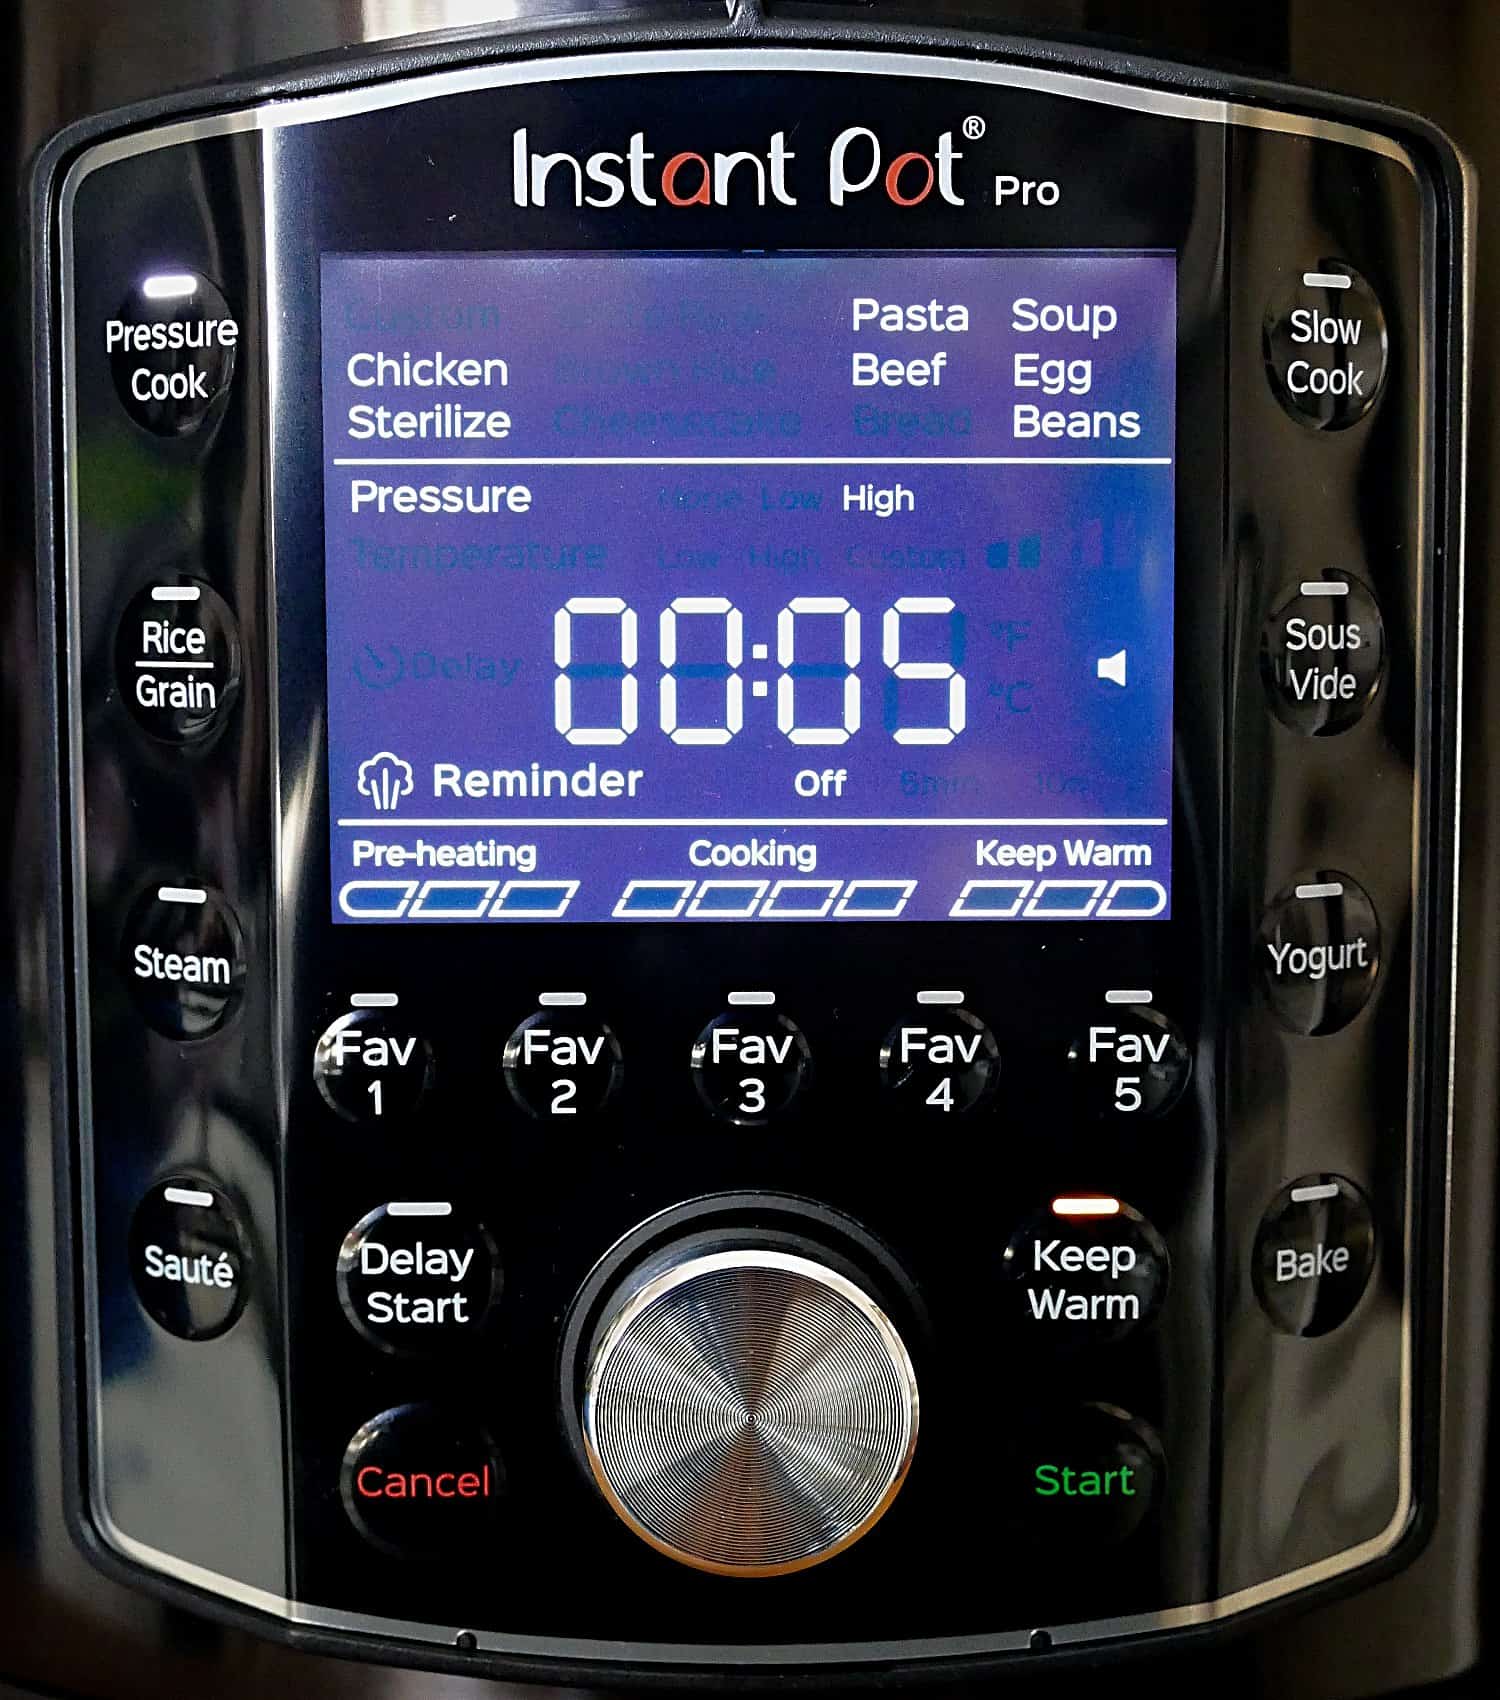 Instant Pot Pro display panel says 00:05 with pressure cook button lit up